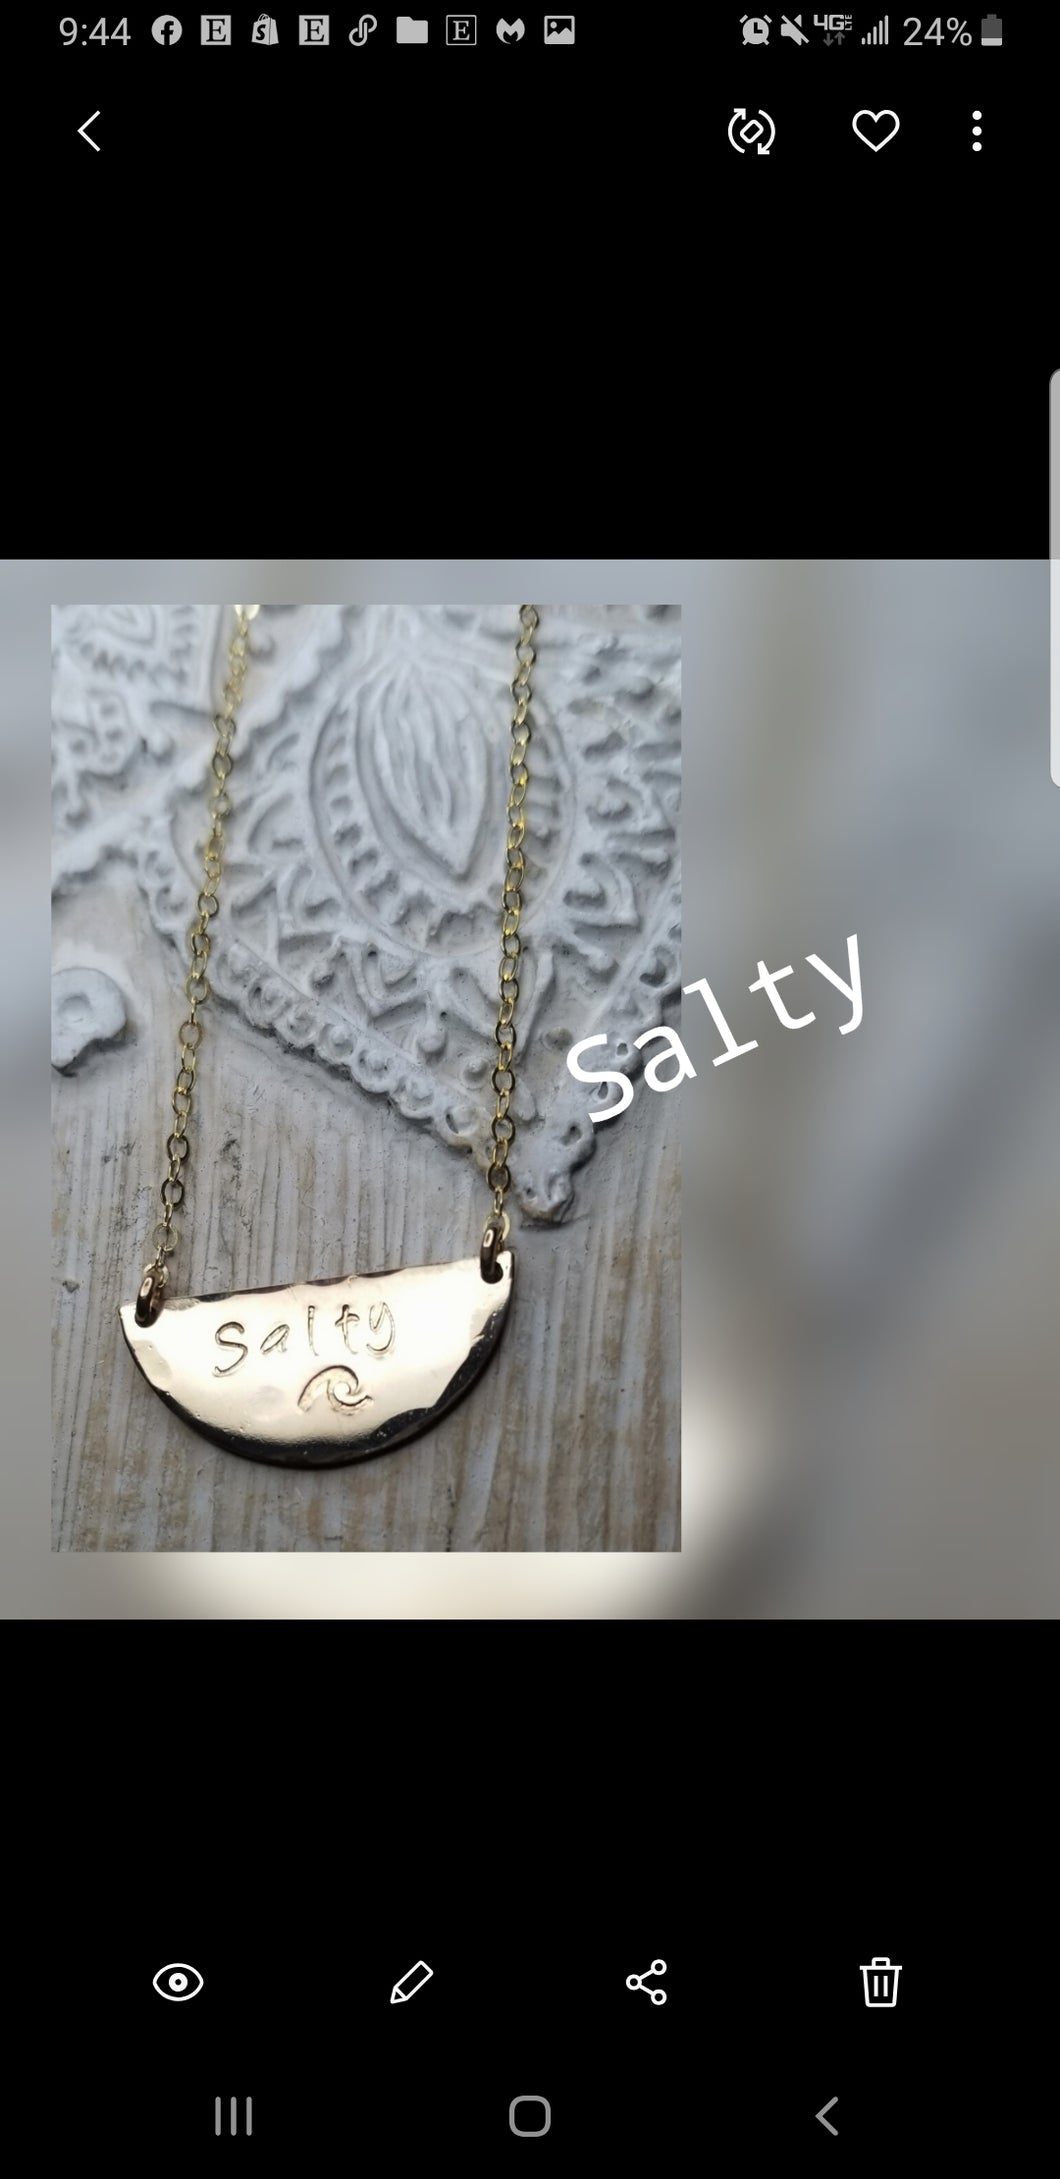 Salty necklace